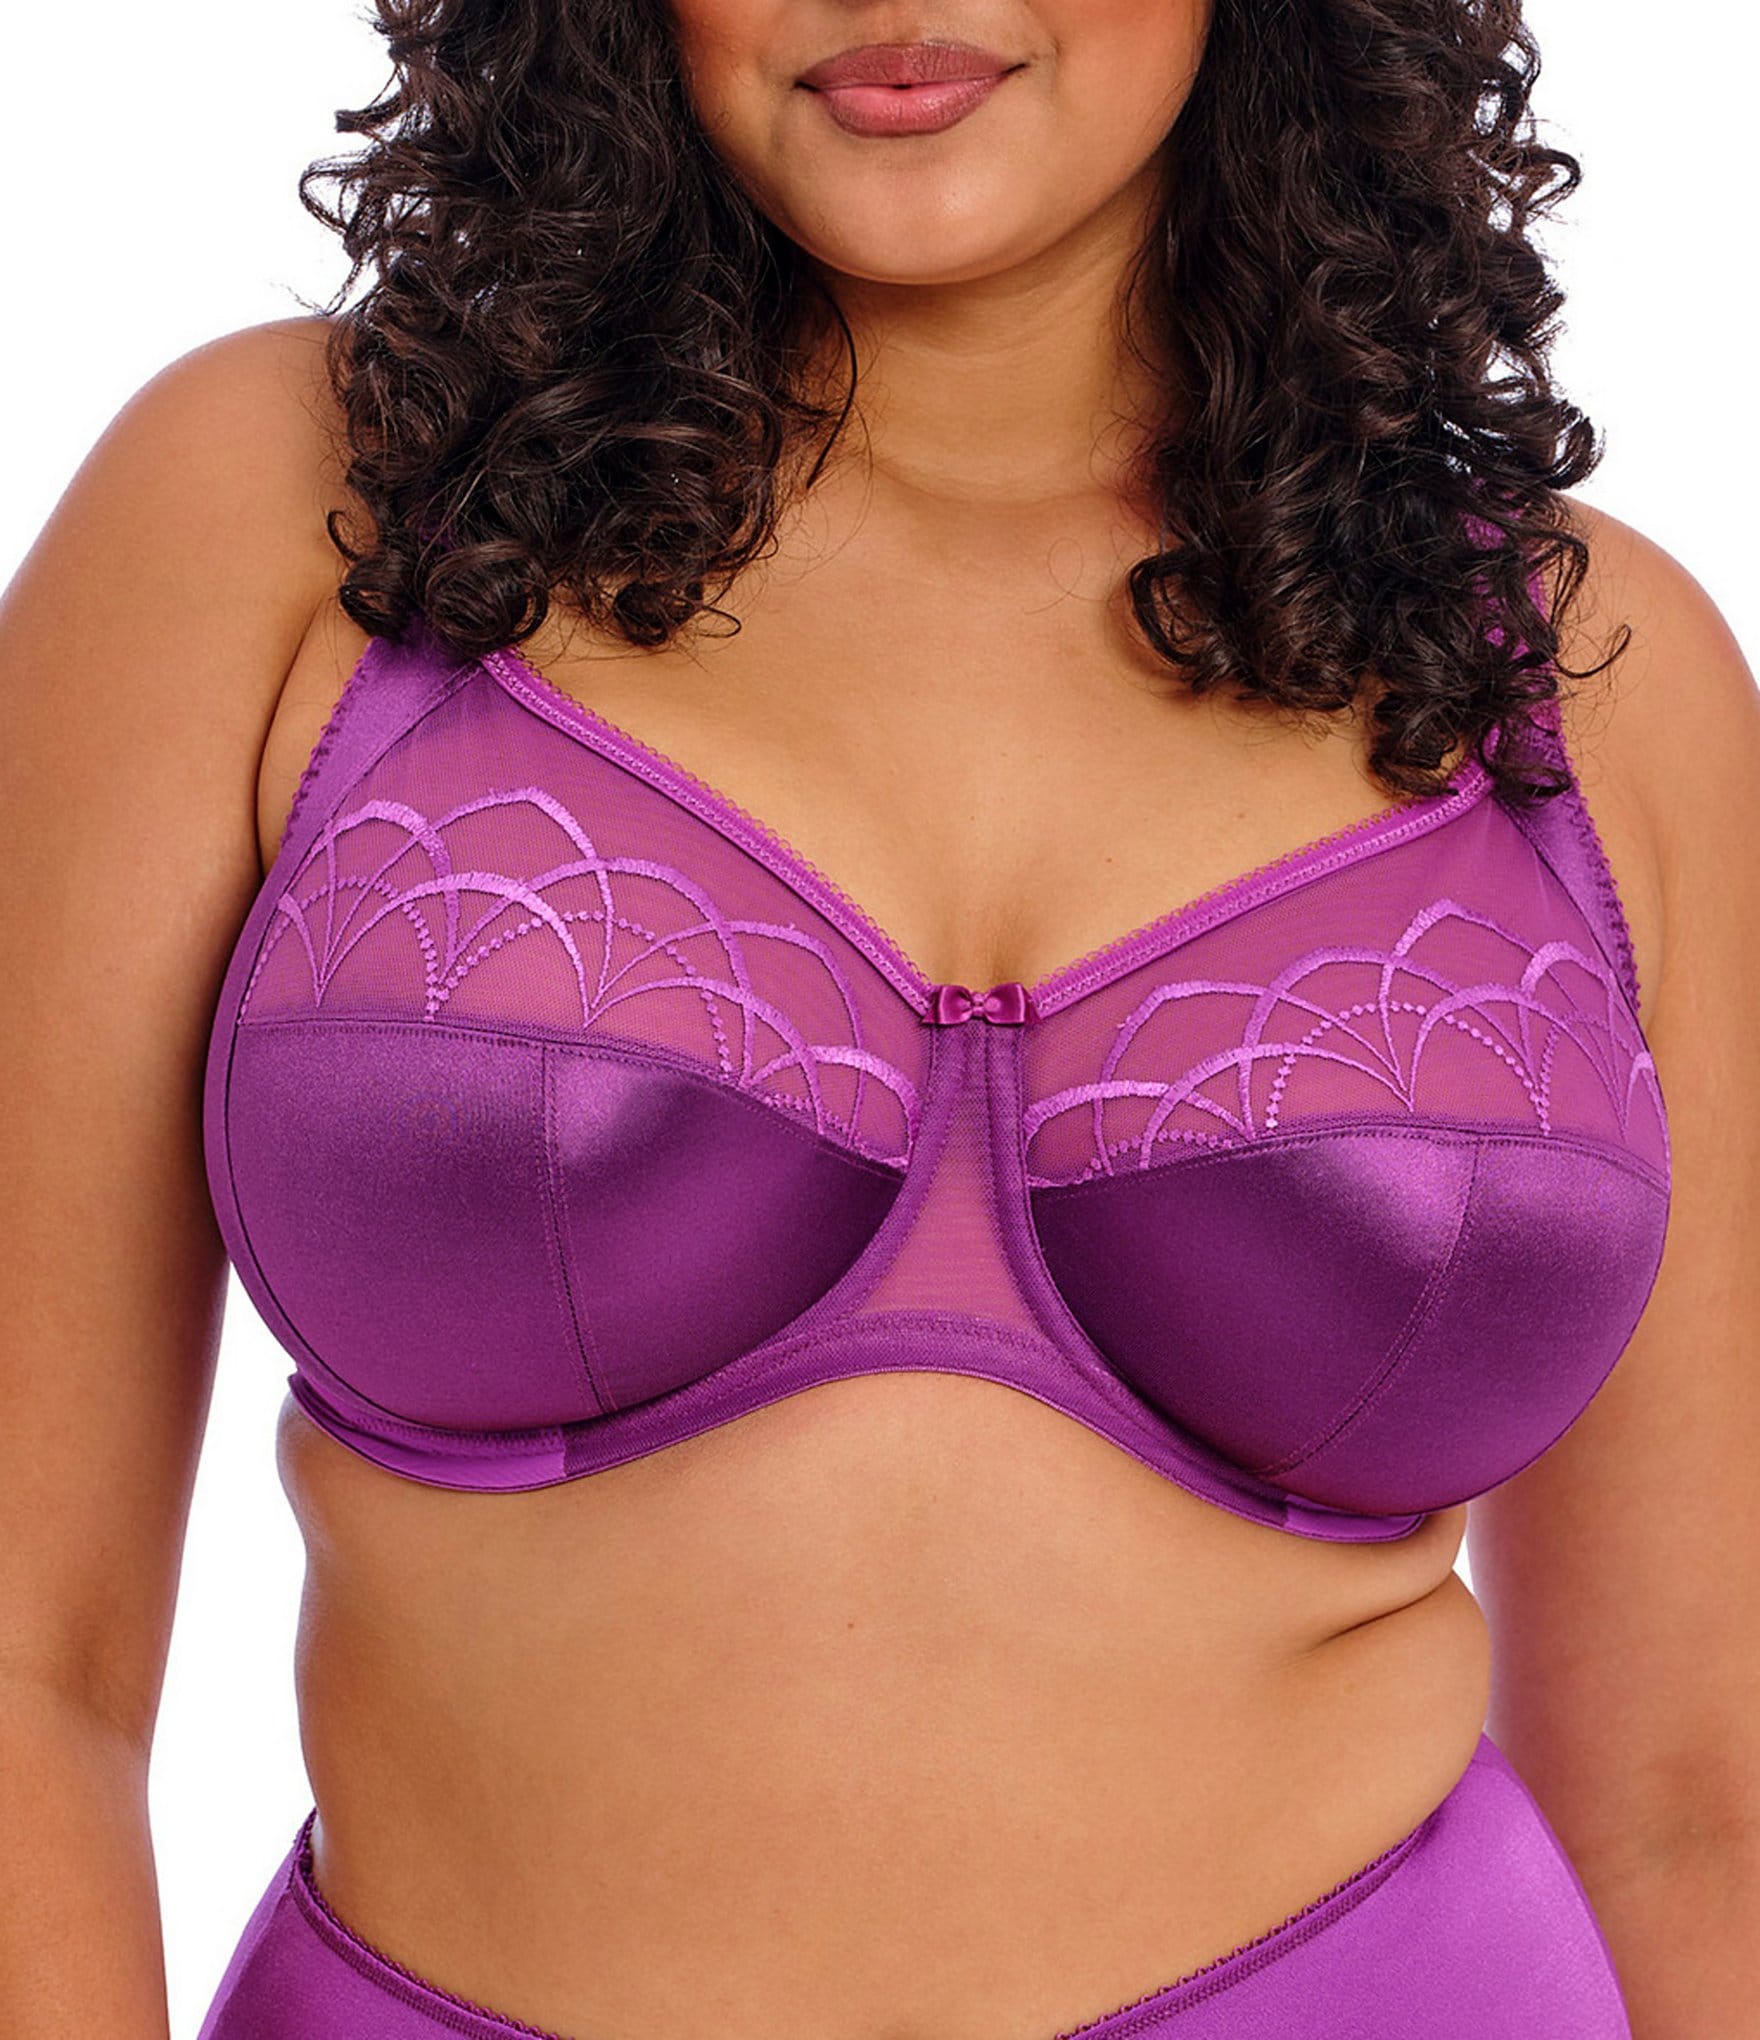 38J Bras and Other hard to find Sizes: Buy them at .